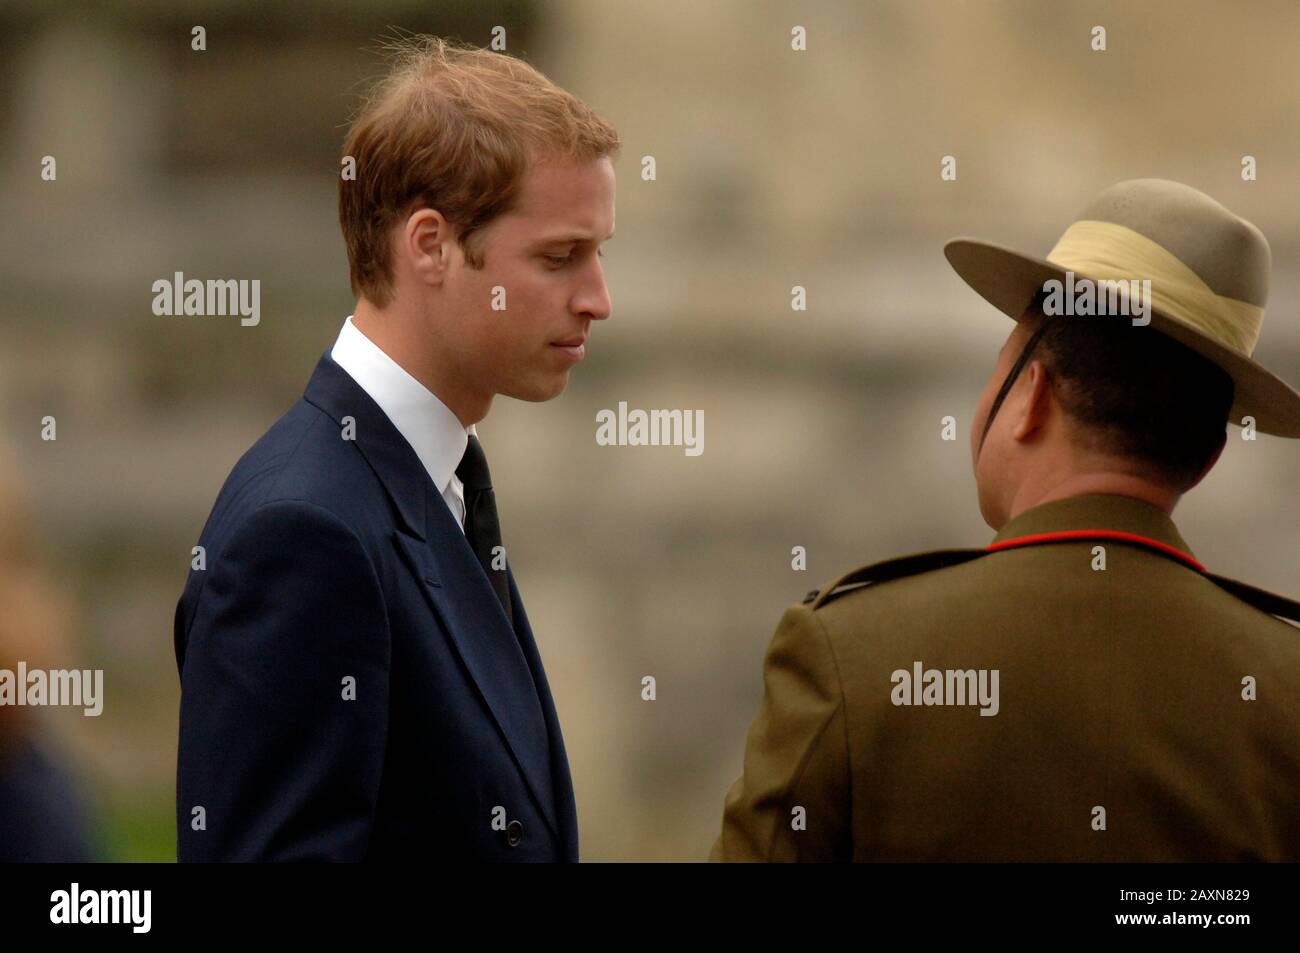 Prince William attending the funeral of Major Alexis Roberts at Canterbury Cathedral in Kent in October 2007. Major 'Lex' Roberts  was killed by an explosion during operations near Kandahar Airfield in the Helmand Province while serving with the 1st Battalion, The Royal Gurkha Rifles. The prince described Major Roberts as “a good friend” and said he was “deeply saddened” by his death. Stock Photo